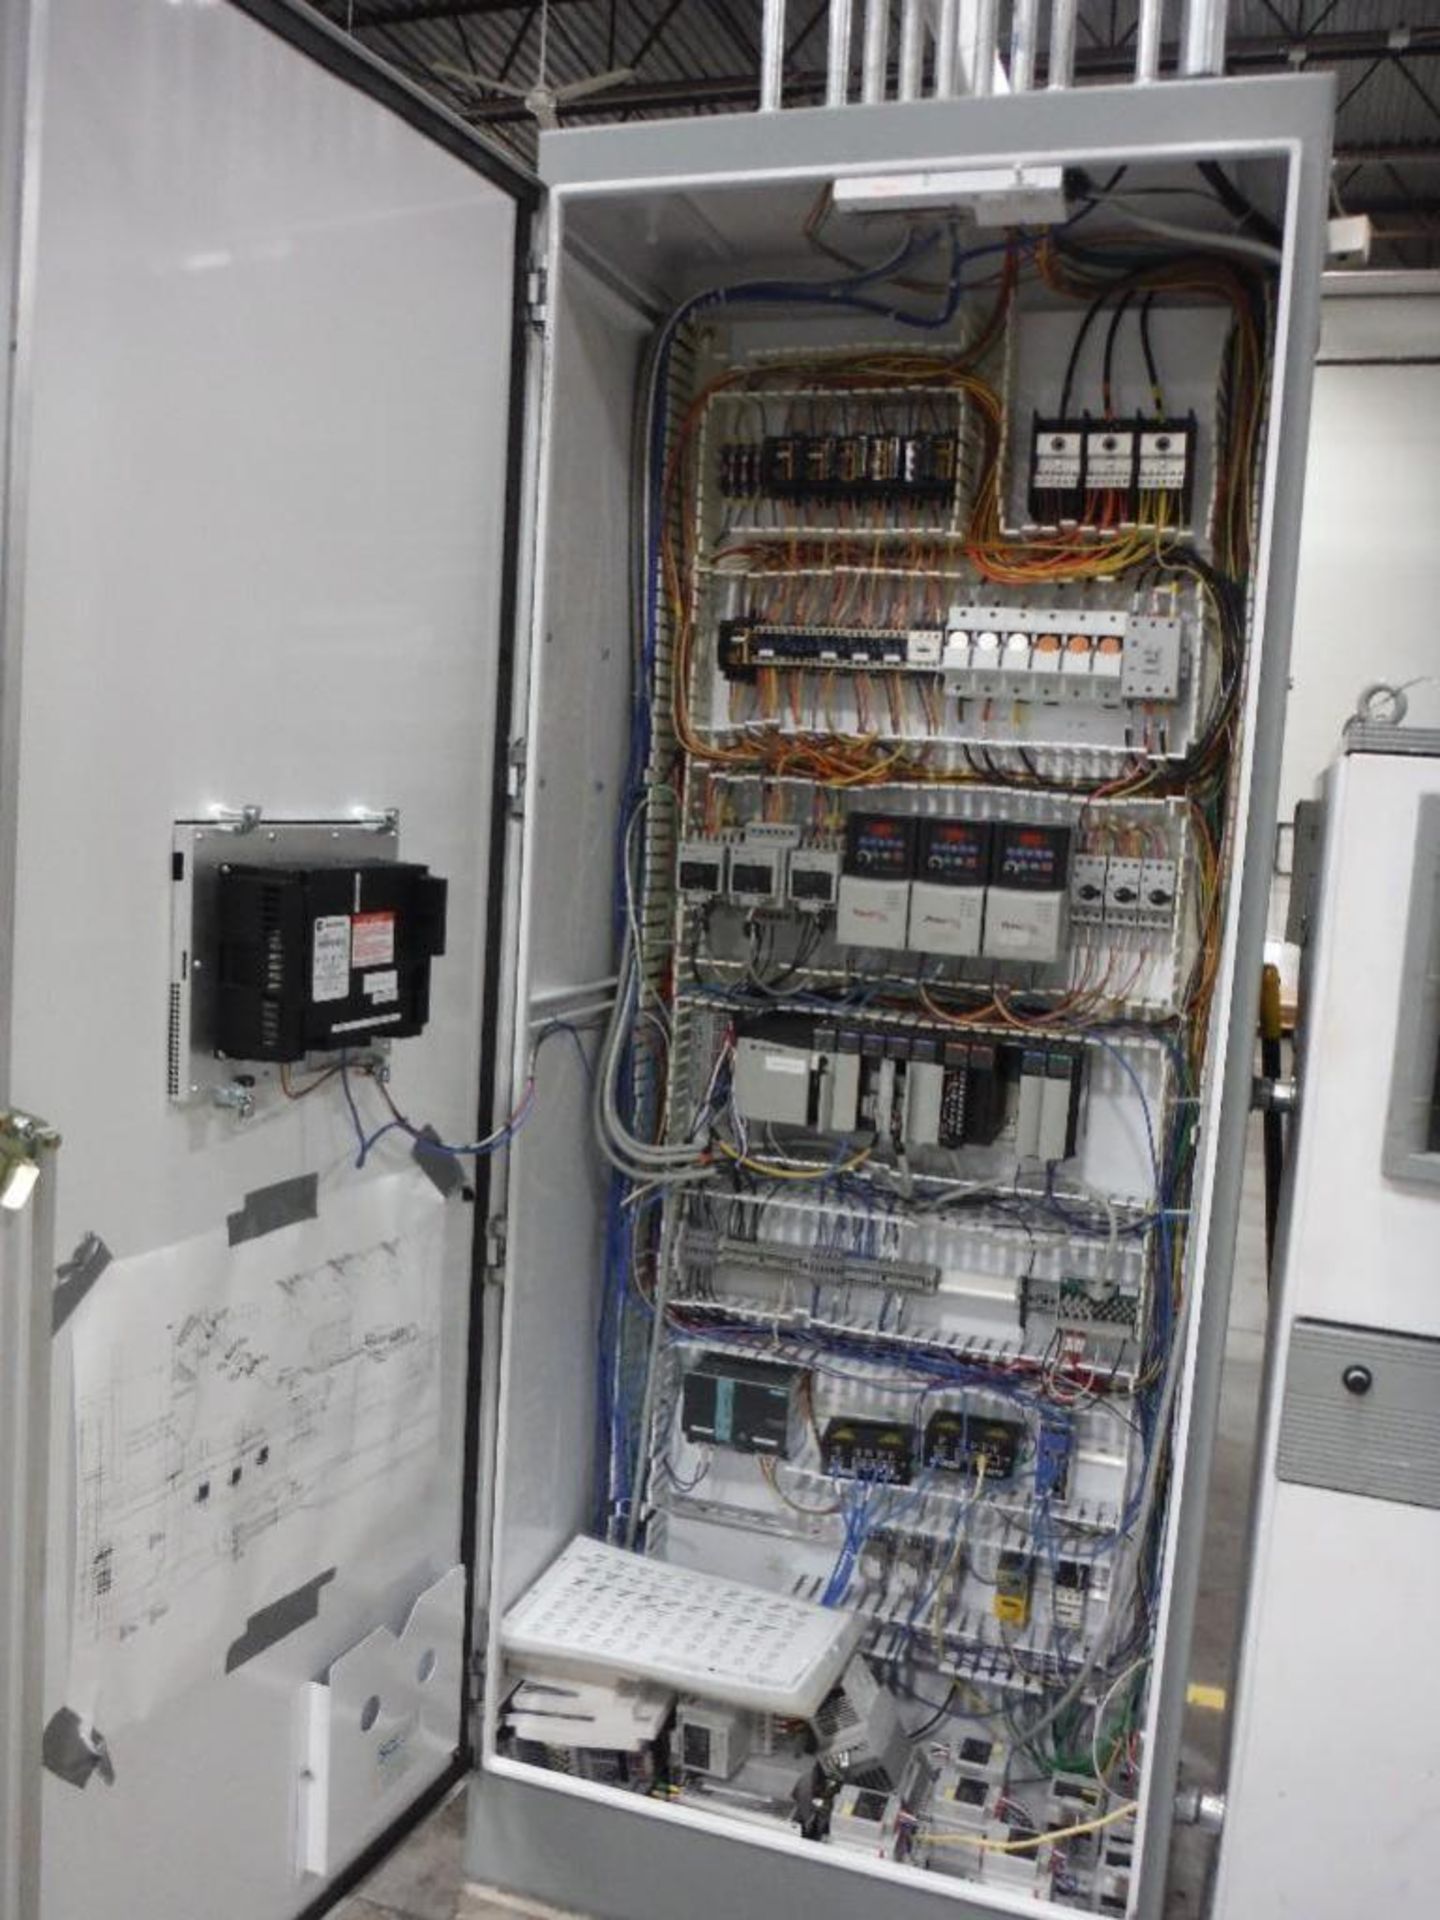 Steel control cabinet with Allen Bradley panelview 1000, (3) powerflex 40 vfds, plc - Rigging Fee: $ - Image 3 of 5